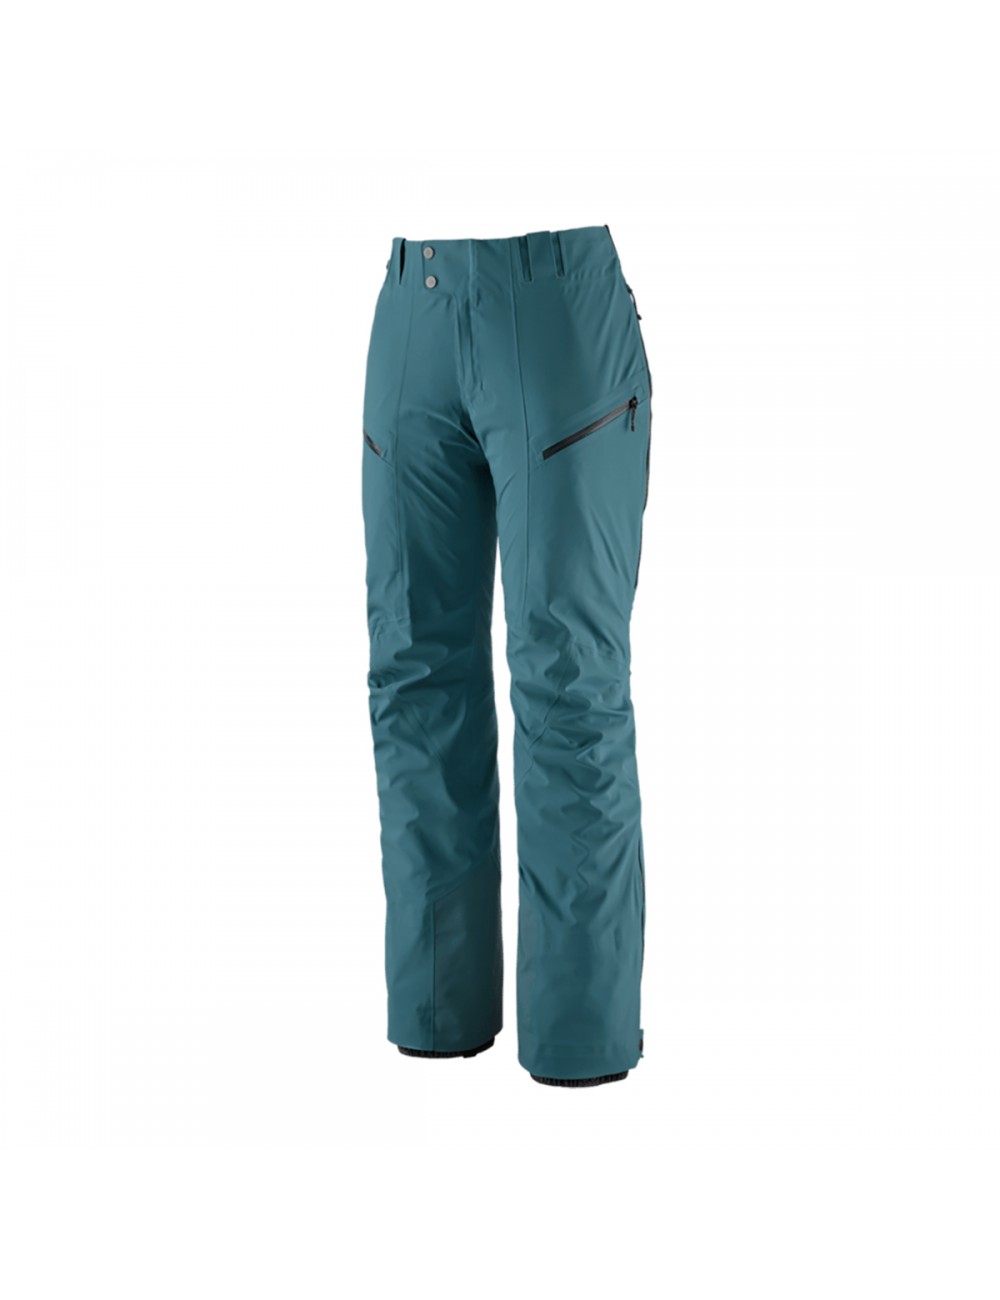 Patagonia Wms Stormstride Pants - Abalone Blue